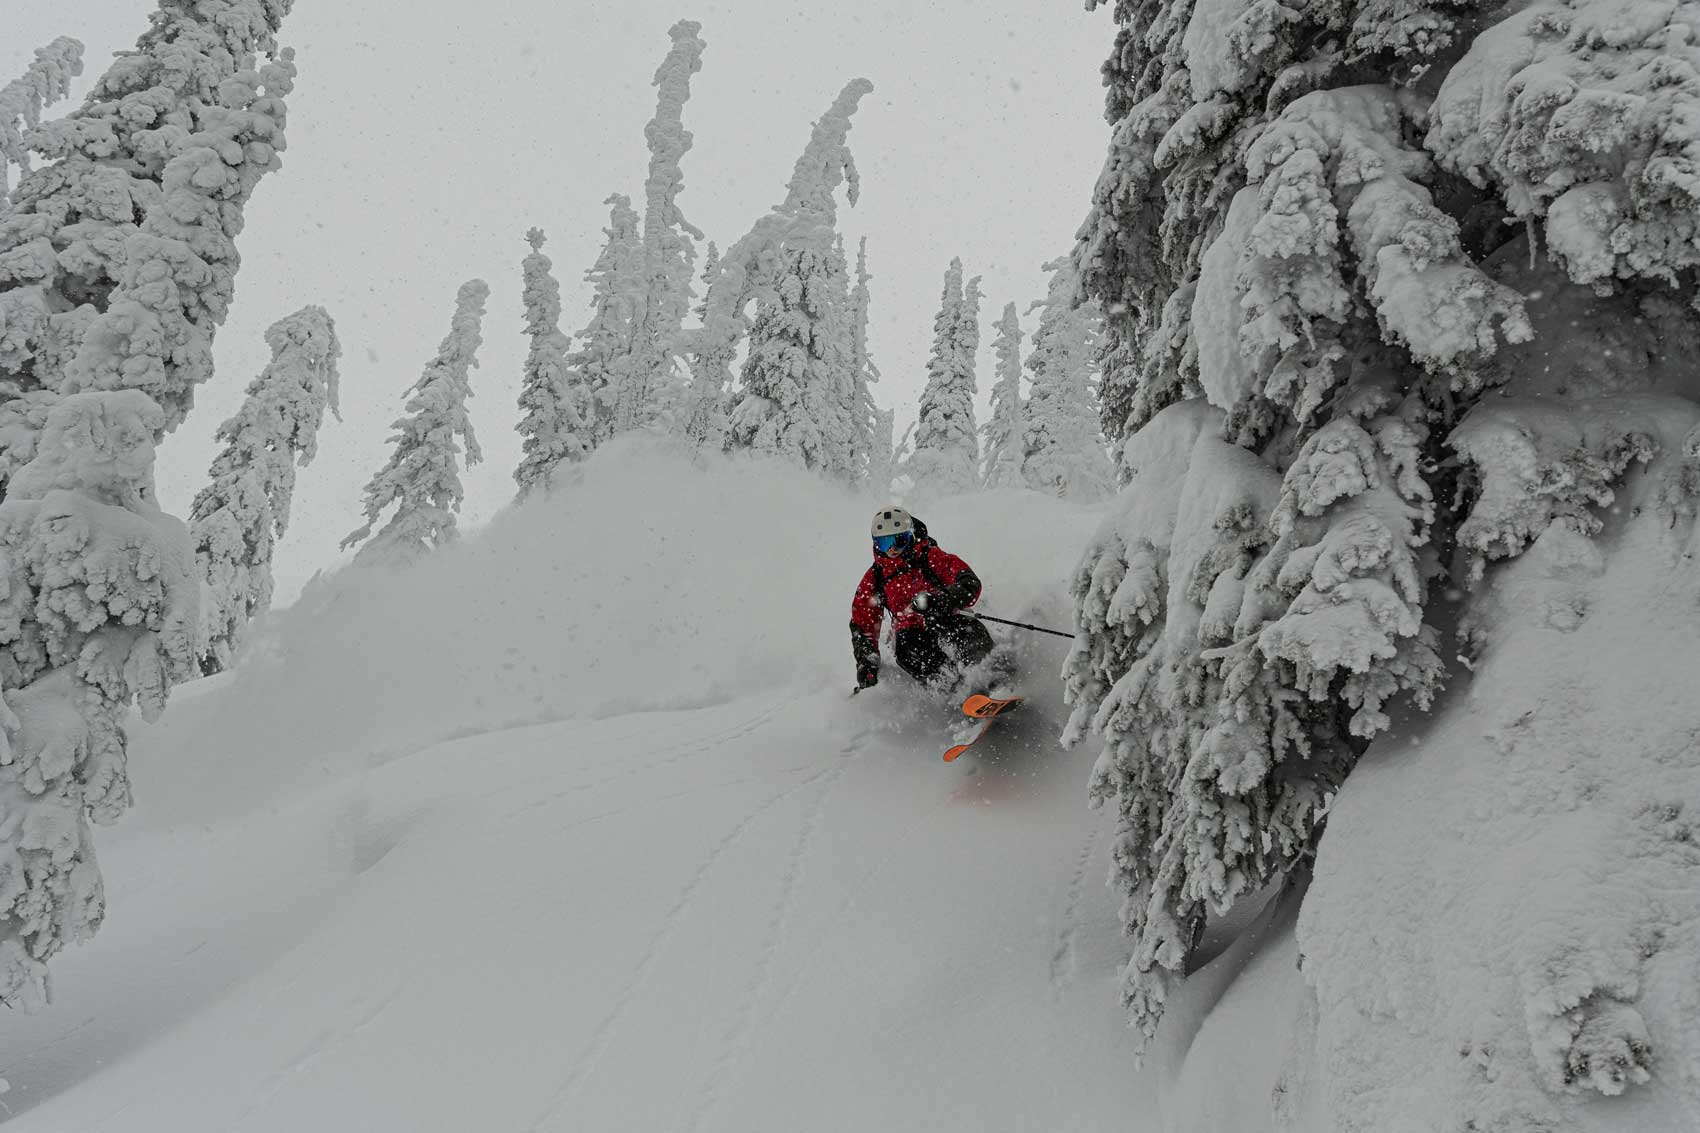 Skier on a guided ski tour of the Powder Highway in British Columbia in deep powder.